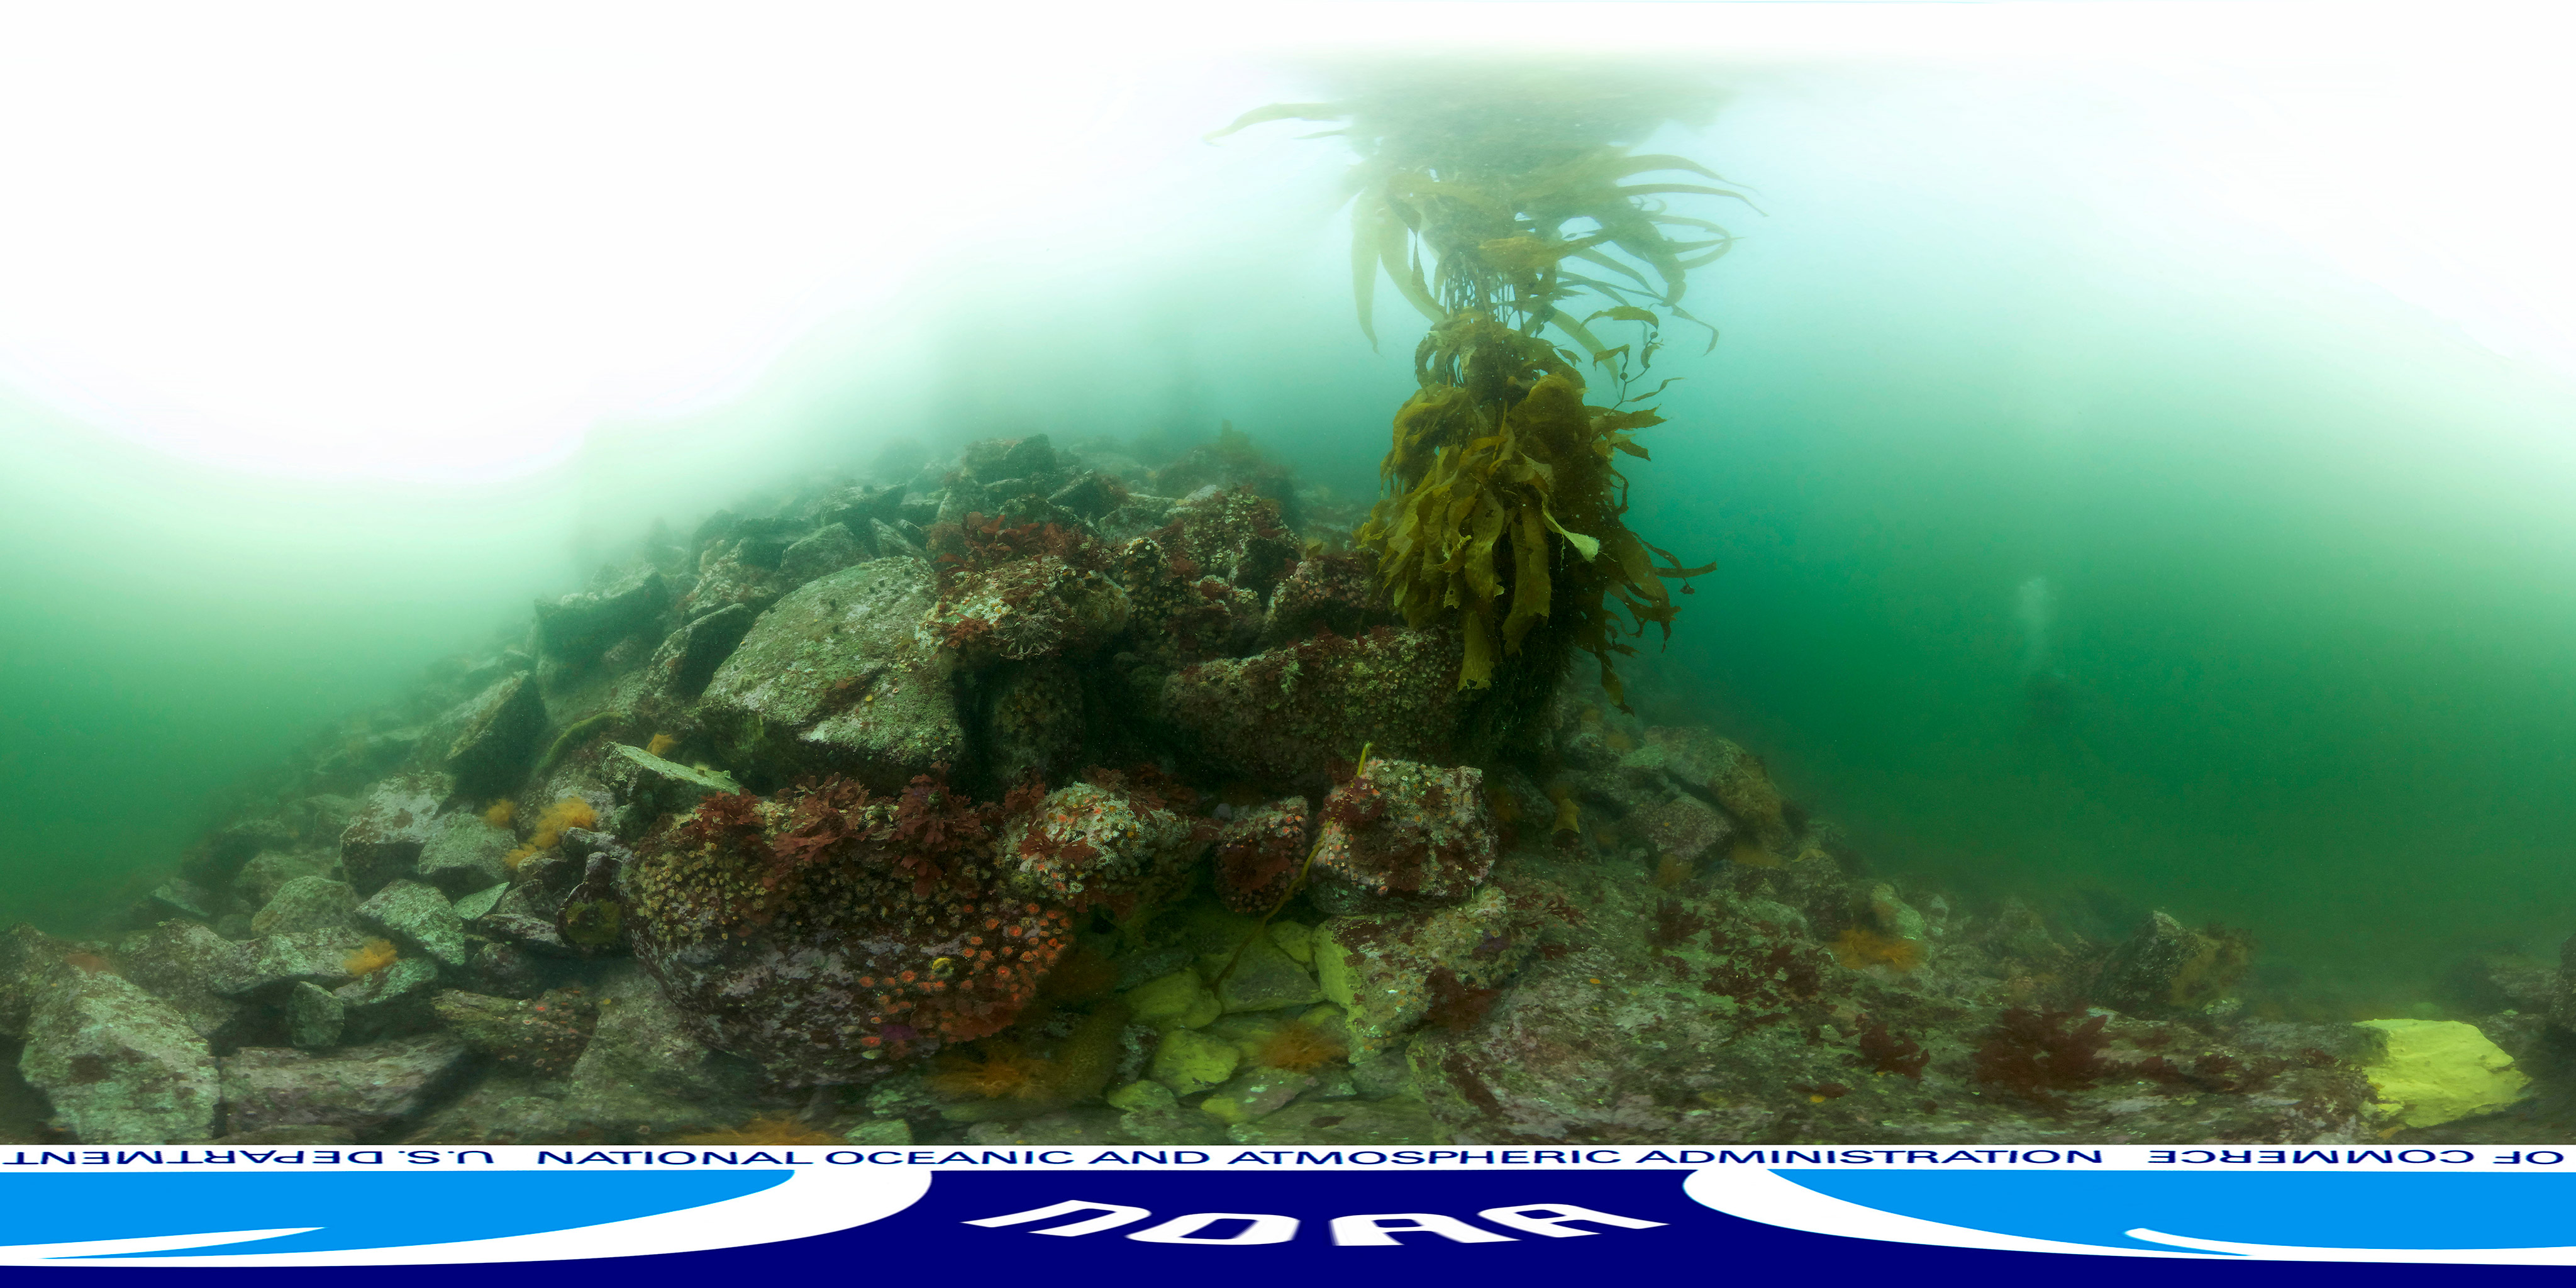 Giant kelp competes with dozens of invertebrates species for space on rocky substrate.